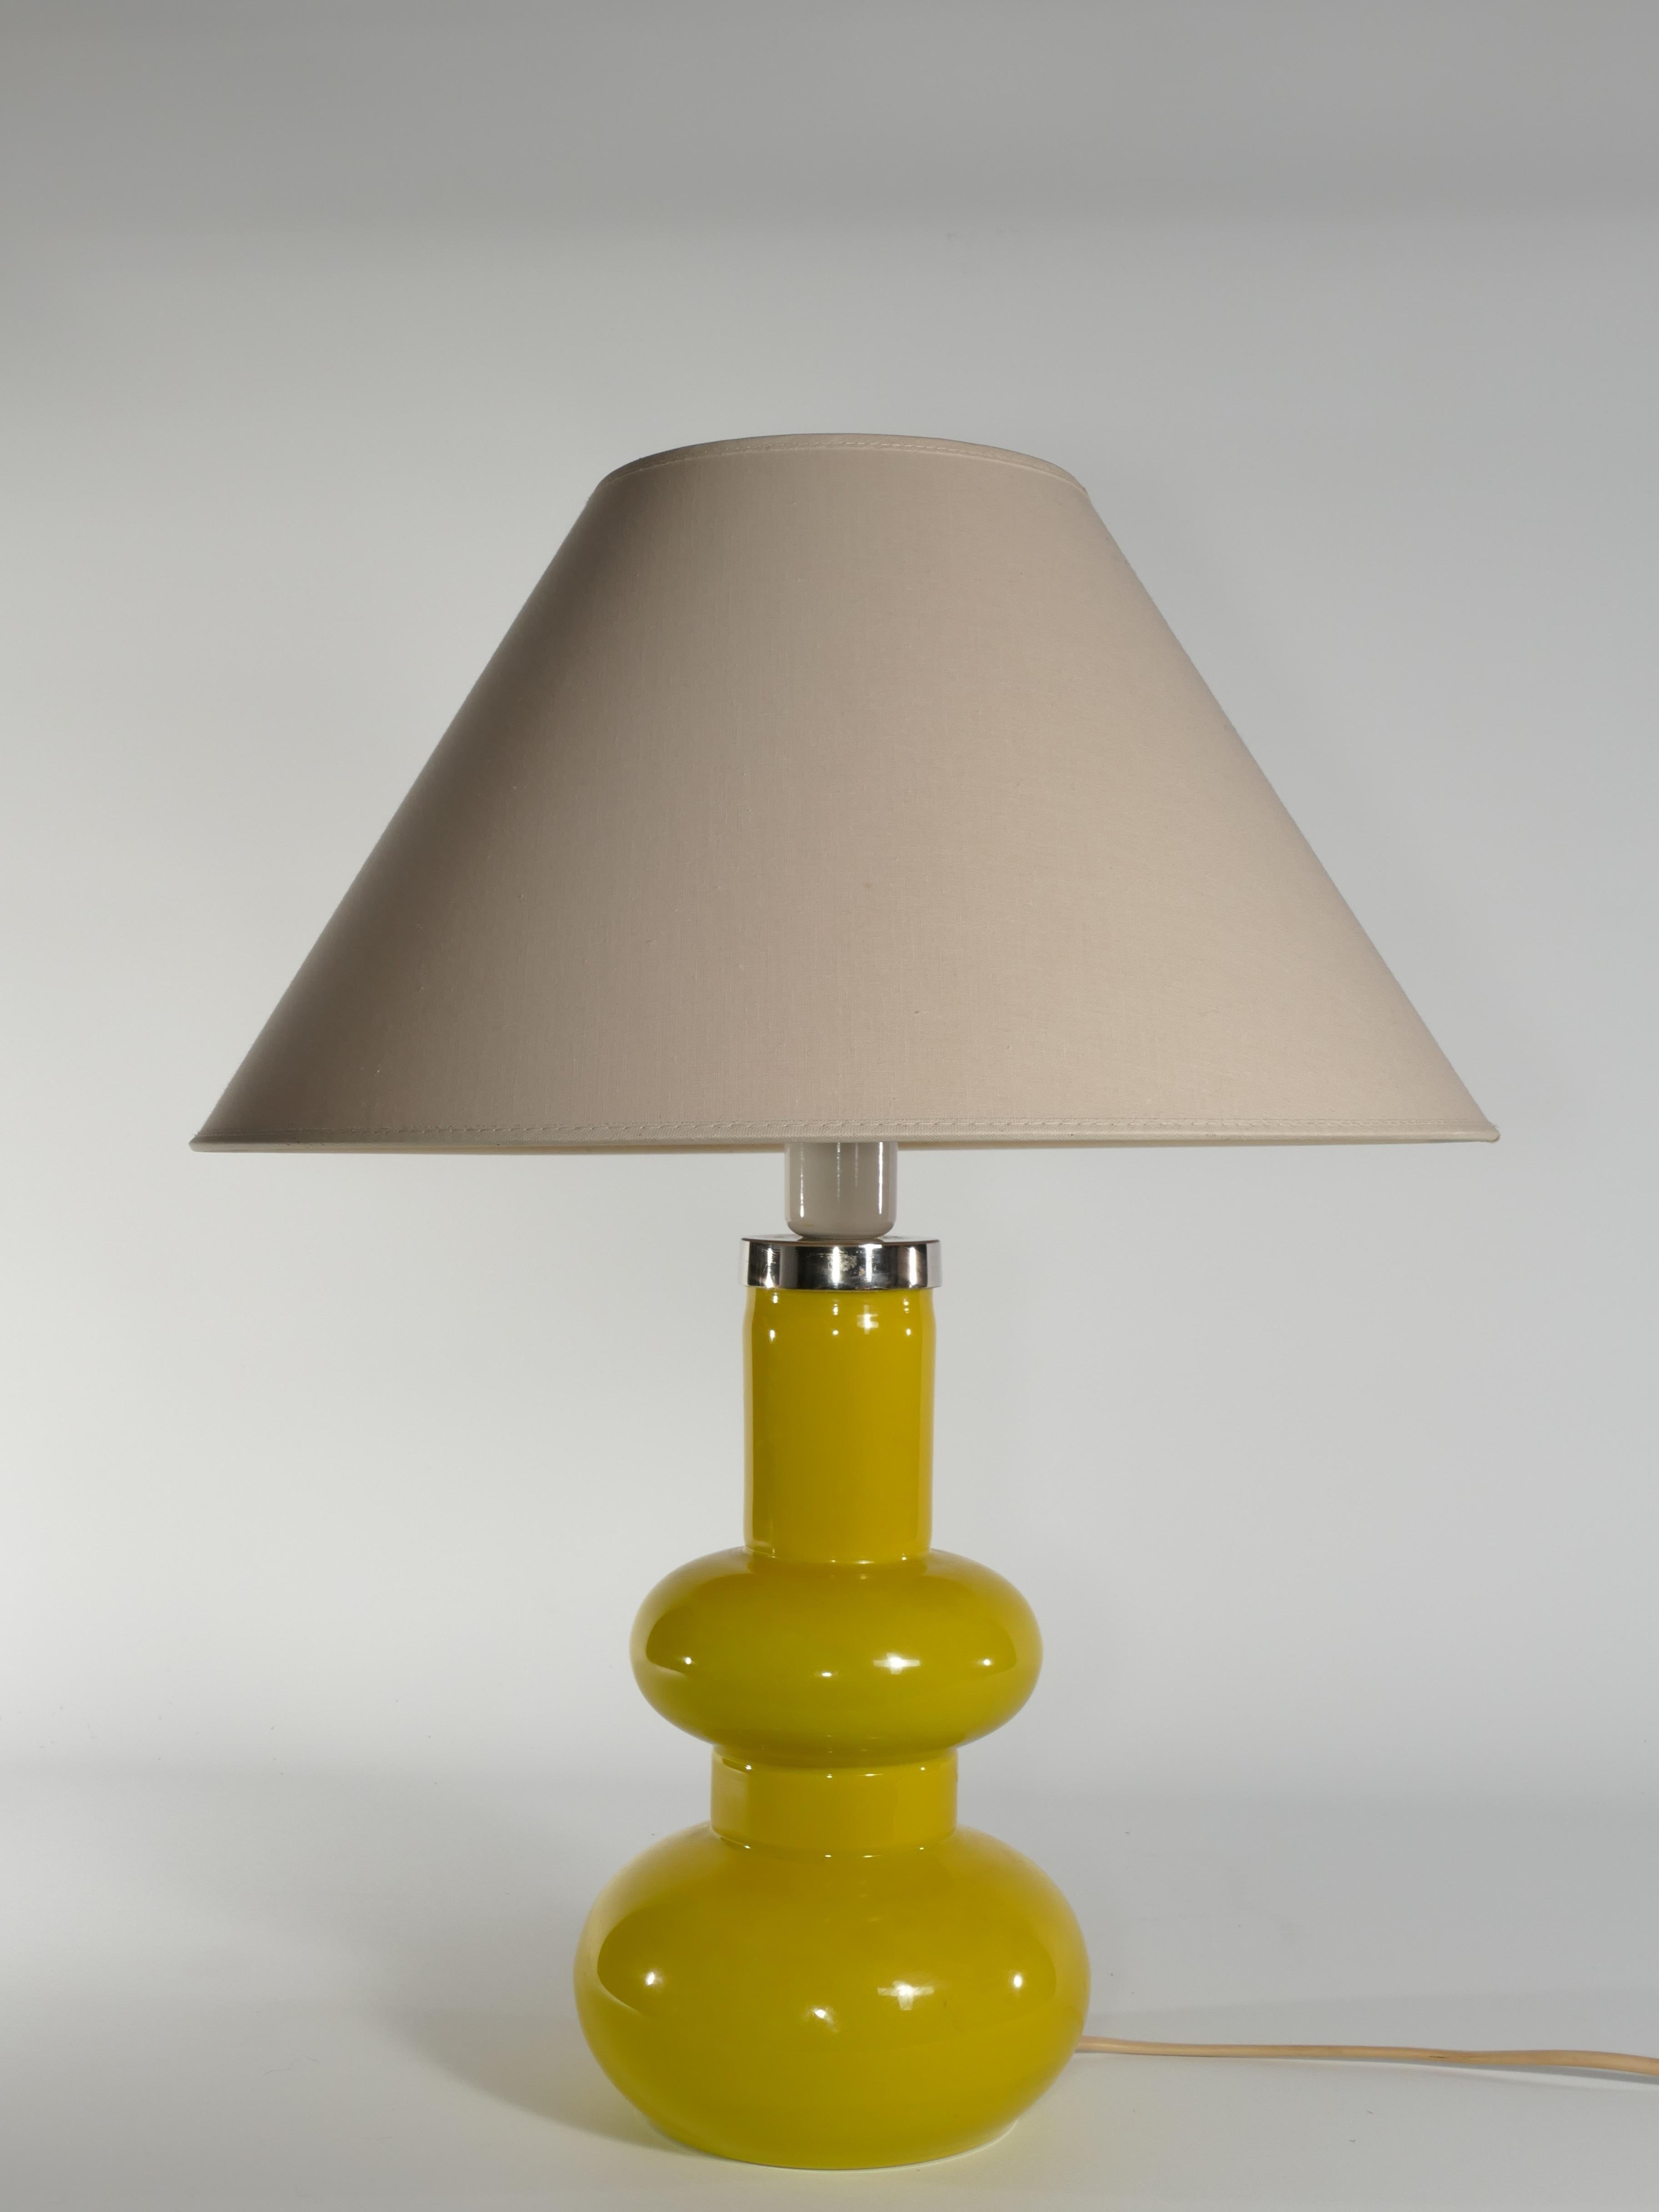 Curvaceous and vibrant, this Mid-Century Modern table lamp by Orrefors boasts a stunning bright yellow hue. The metallic section below the lamp fixture features an engraved 